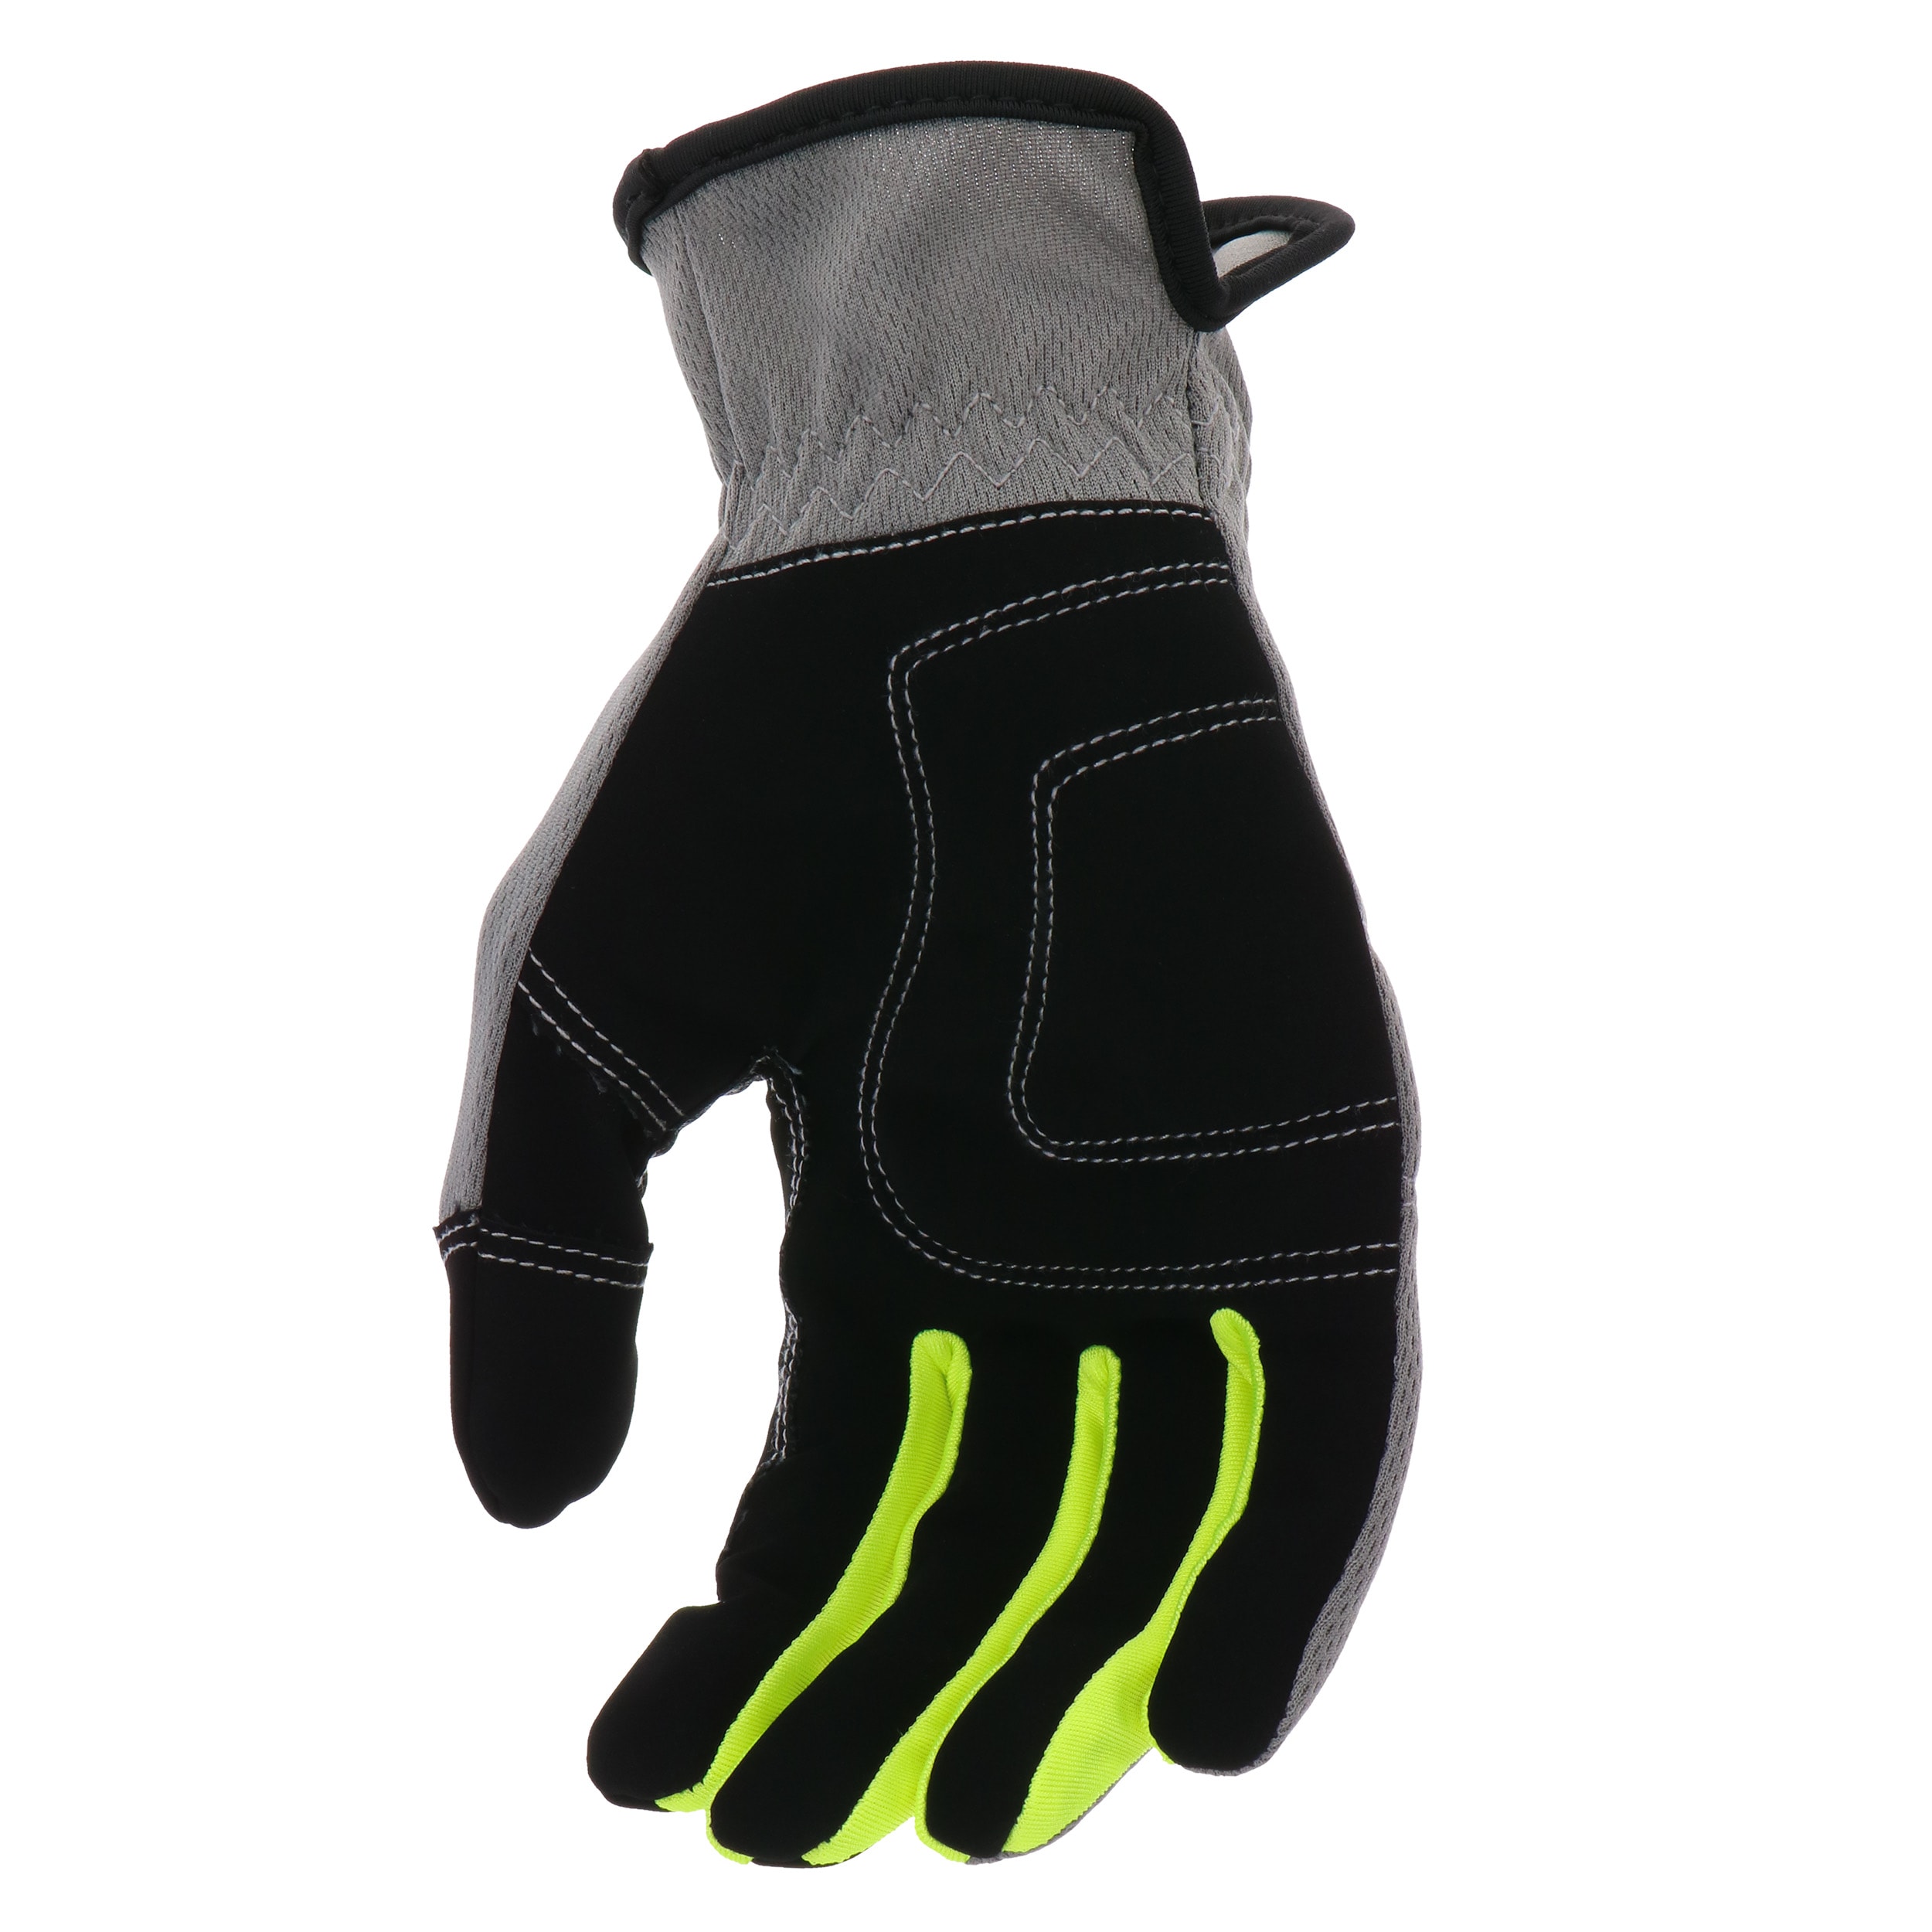 Project Source X-large Black Polyester Gloves, (1-Pair) in the Work Gloves  department at